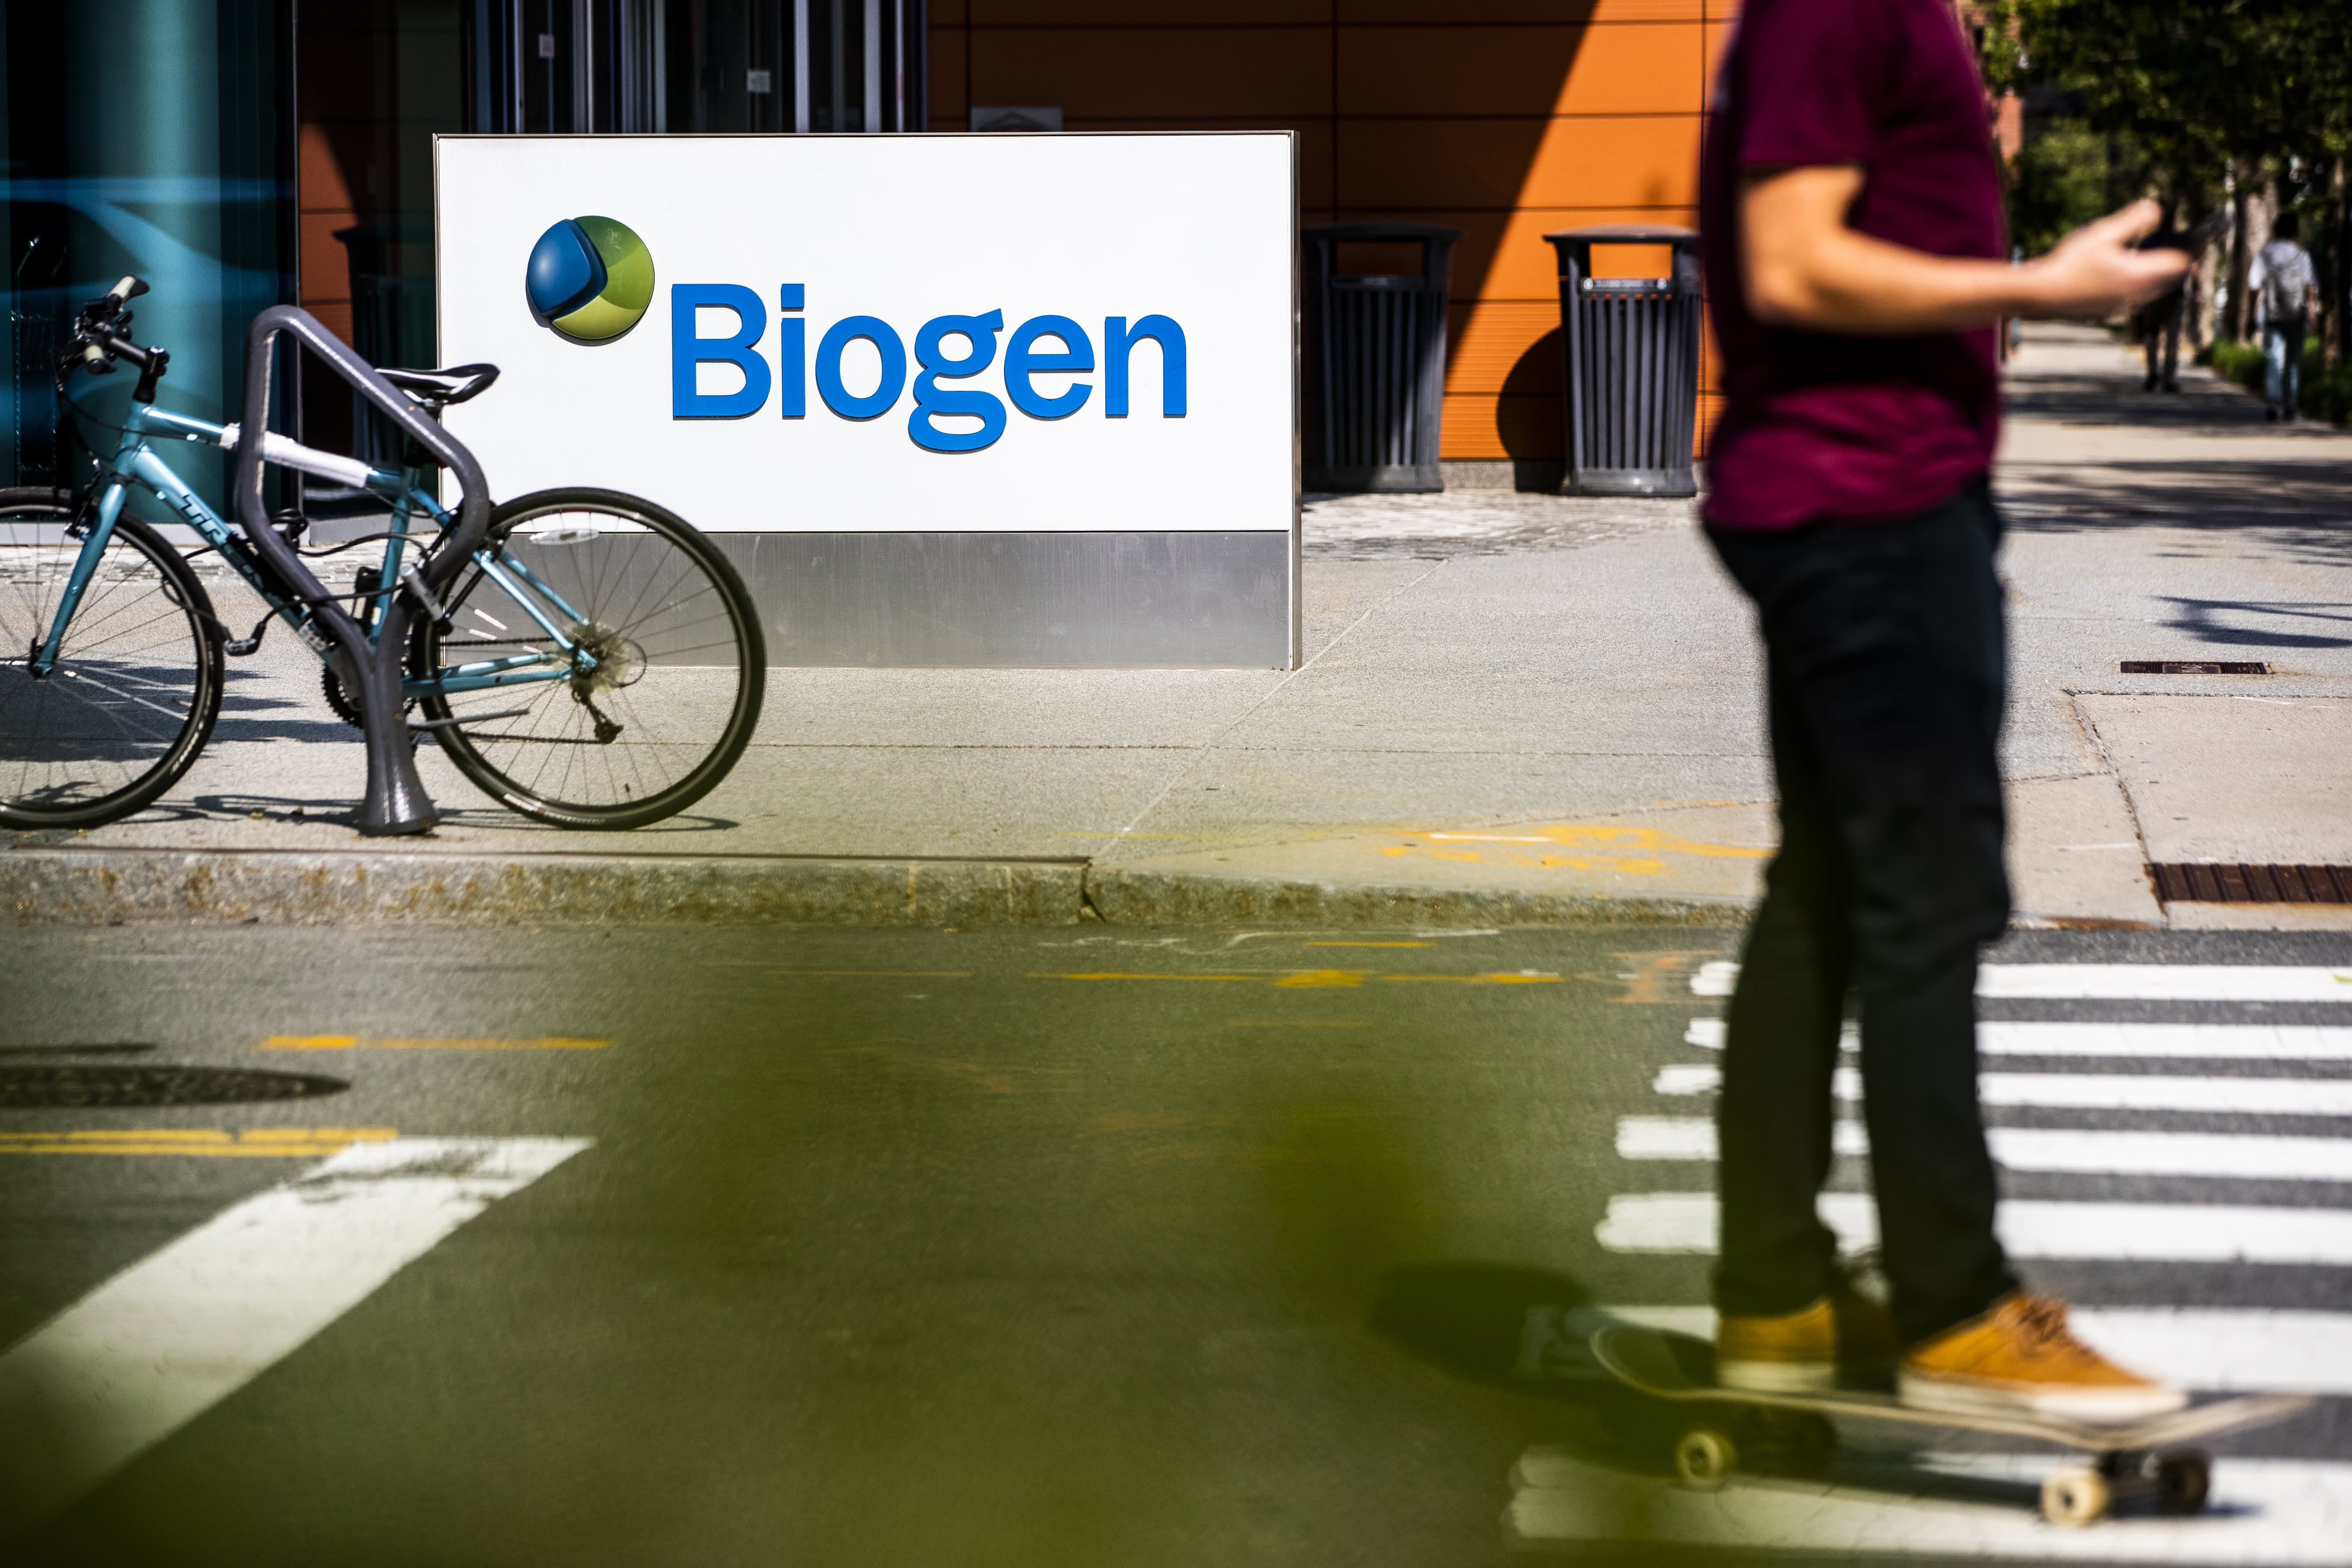 Biogen faces tough questions over $56K-a-year price of newly approved Alzheimer's drug - CNBC